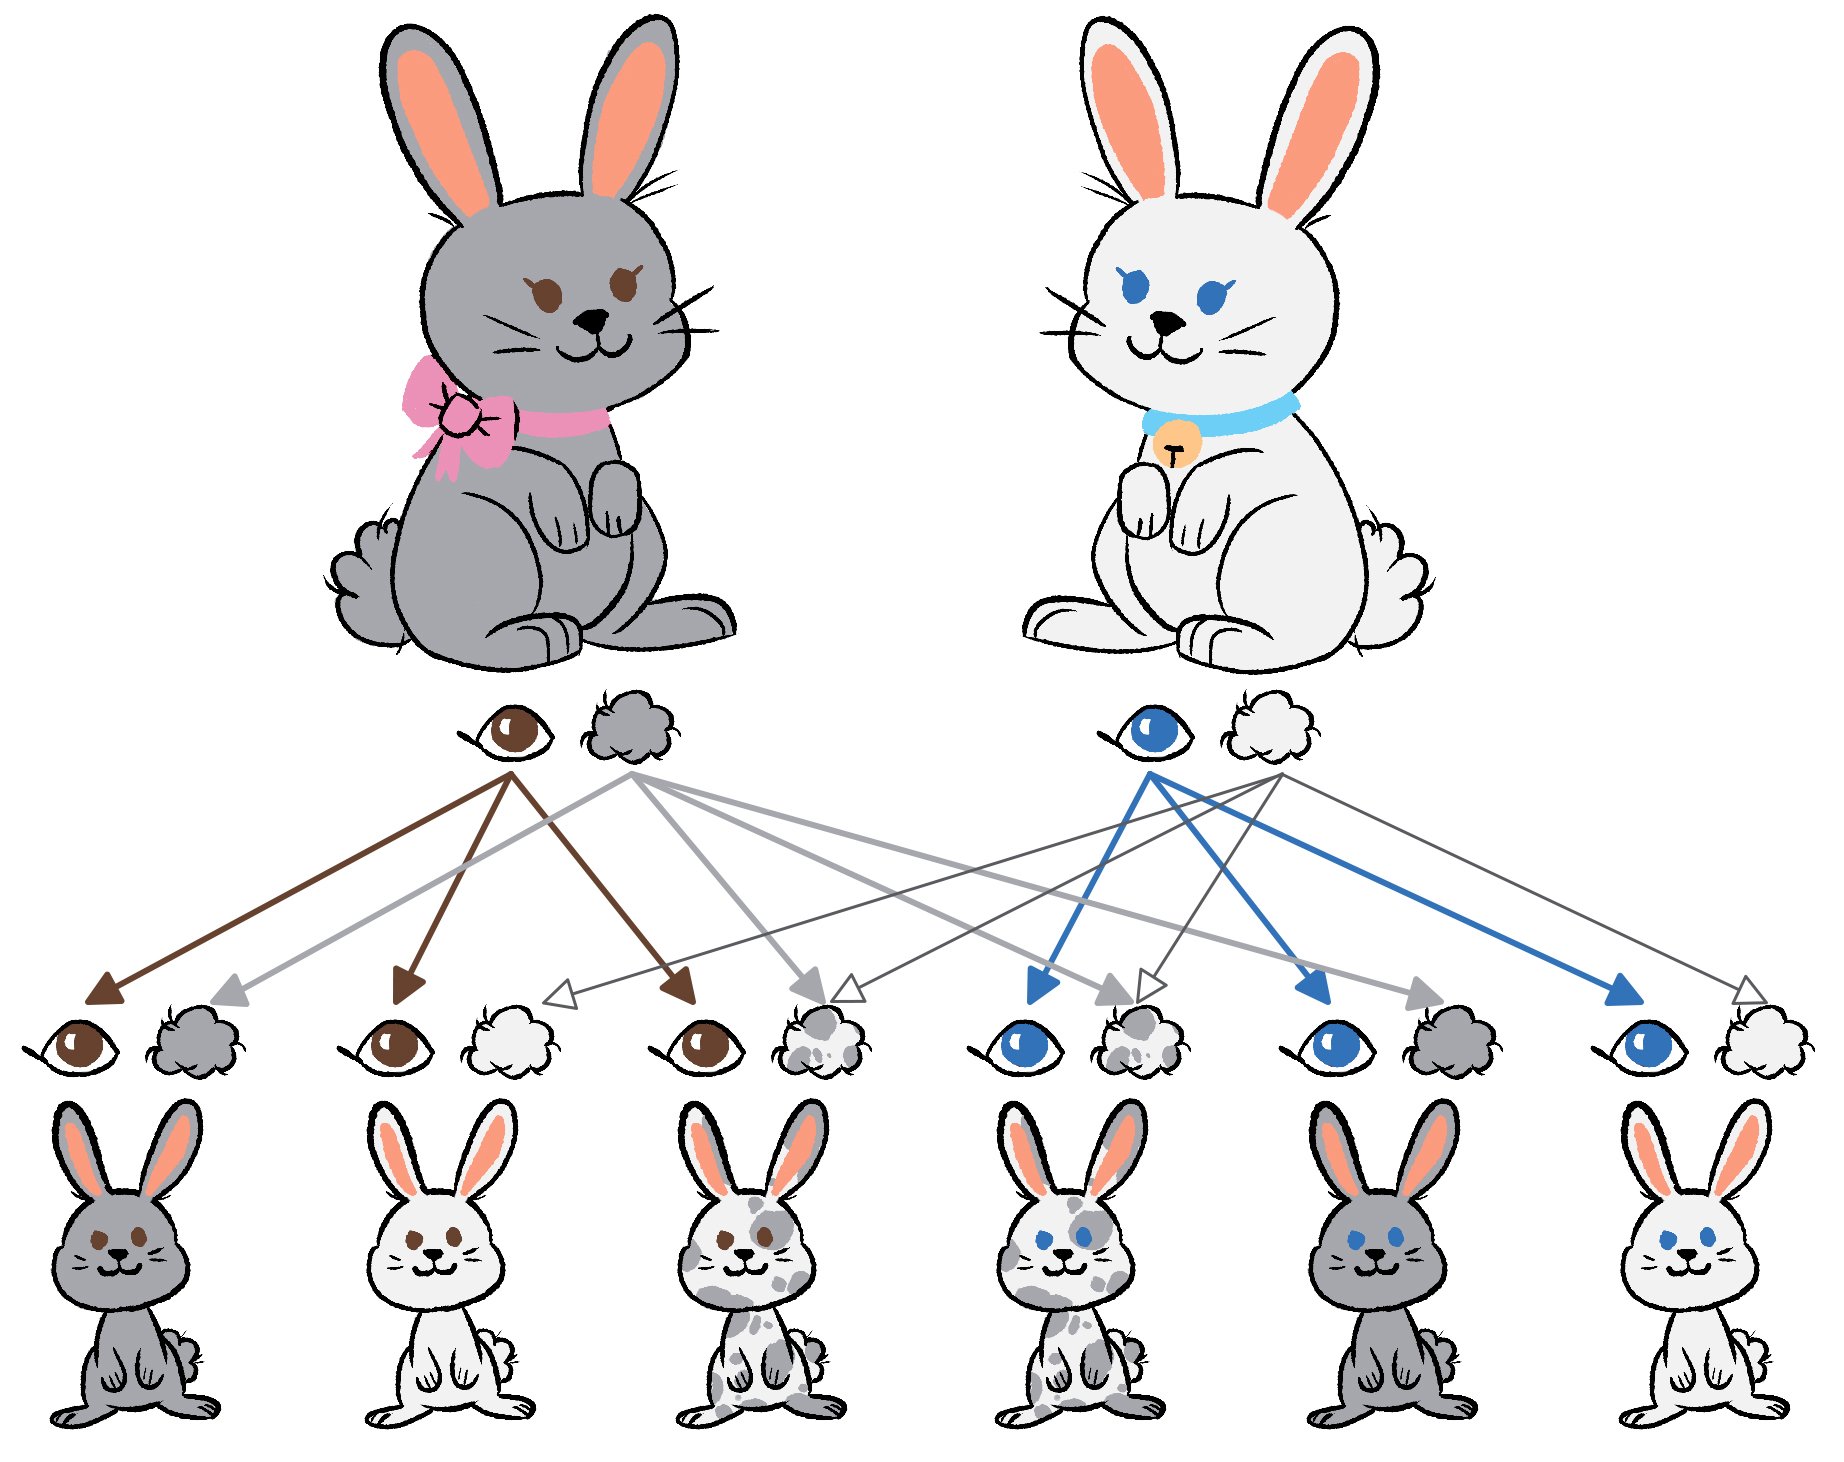 Variation in a Bunny Family